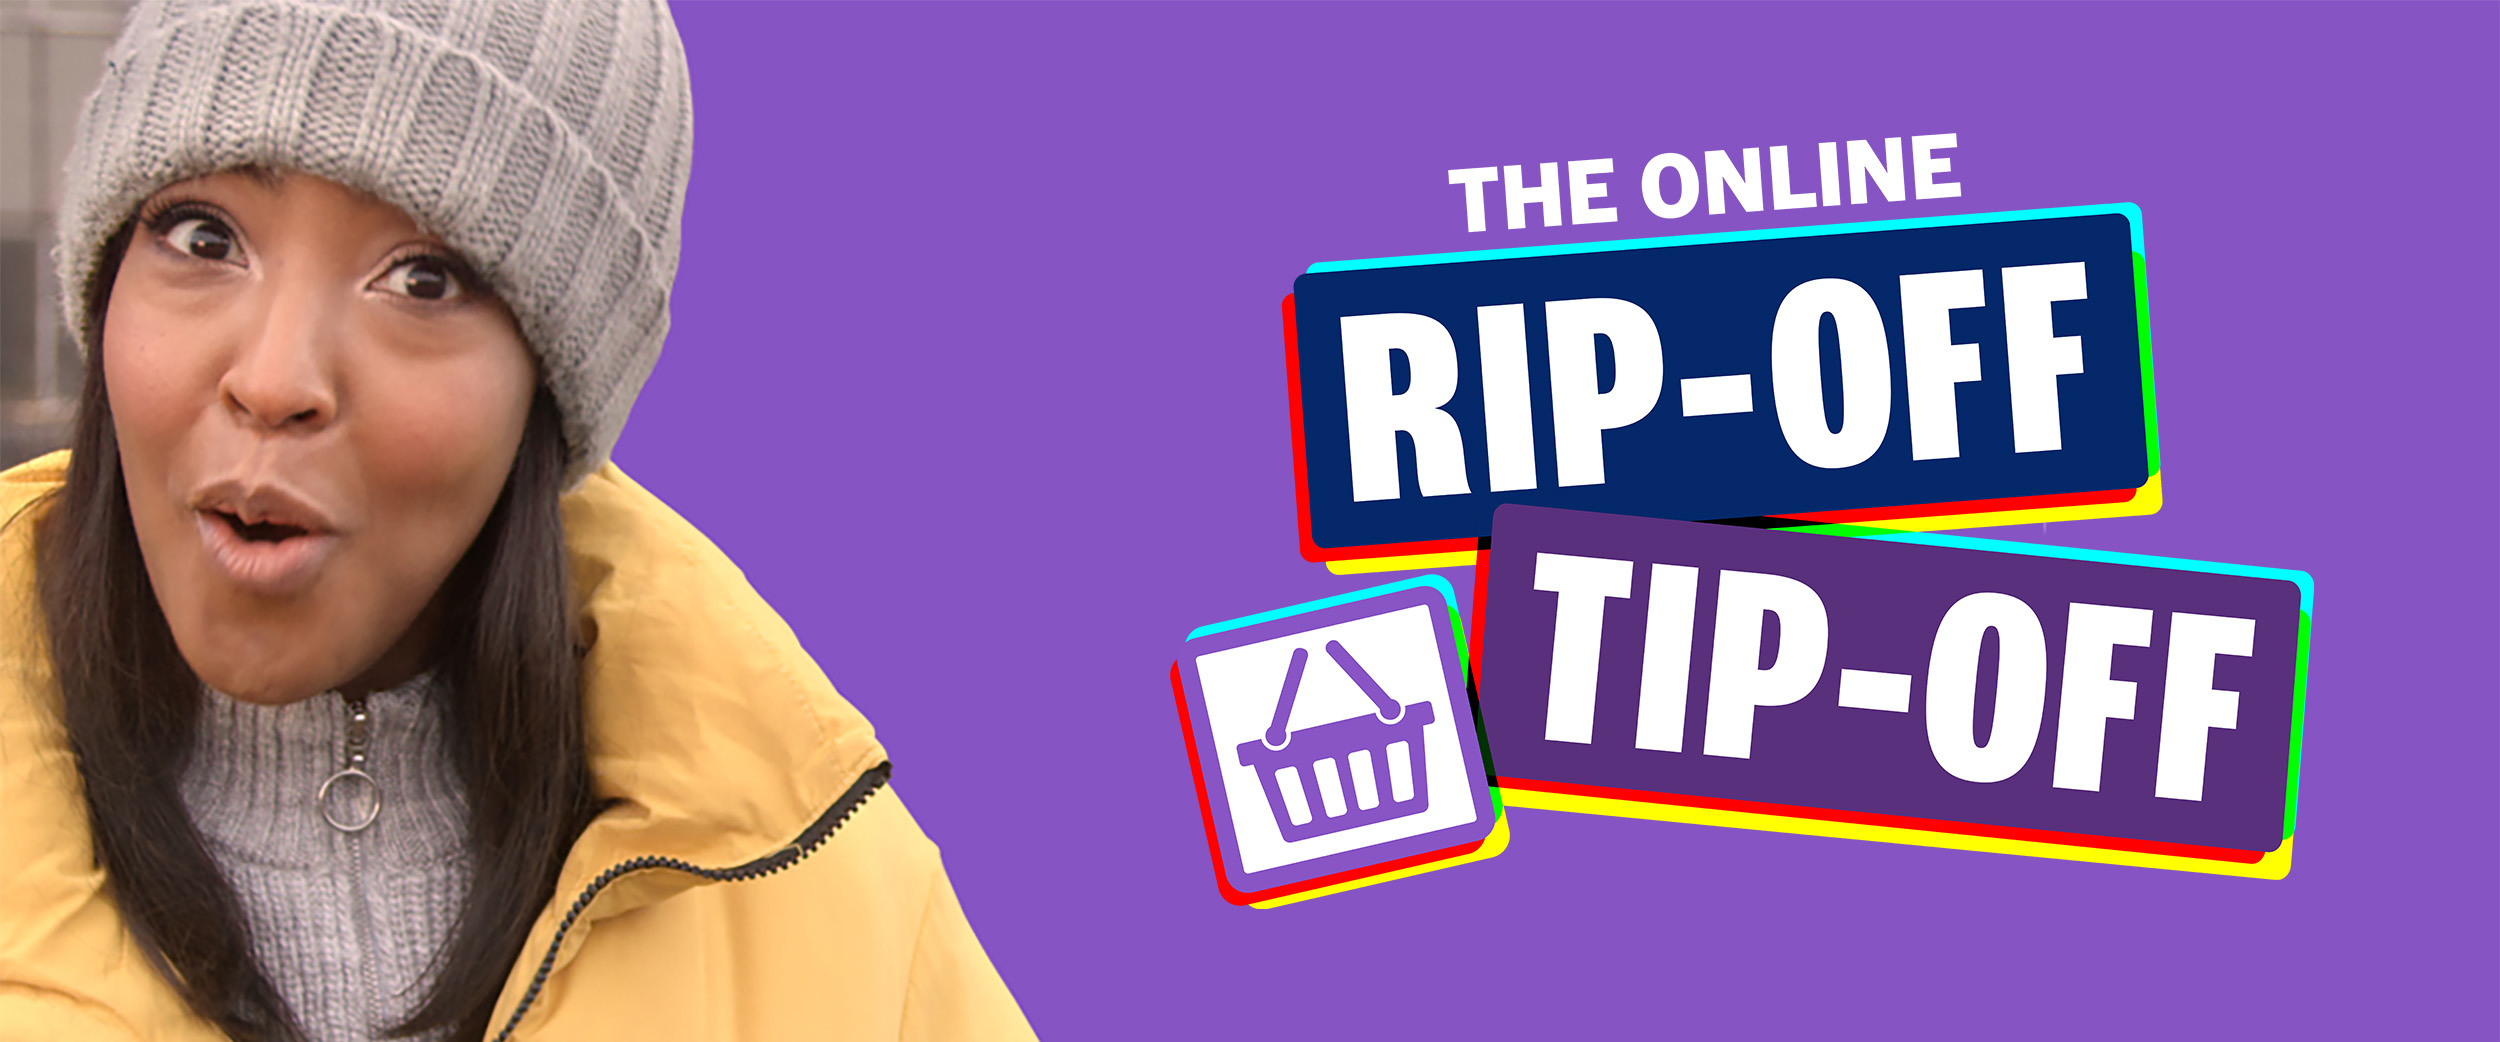 the online rip off tip off